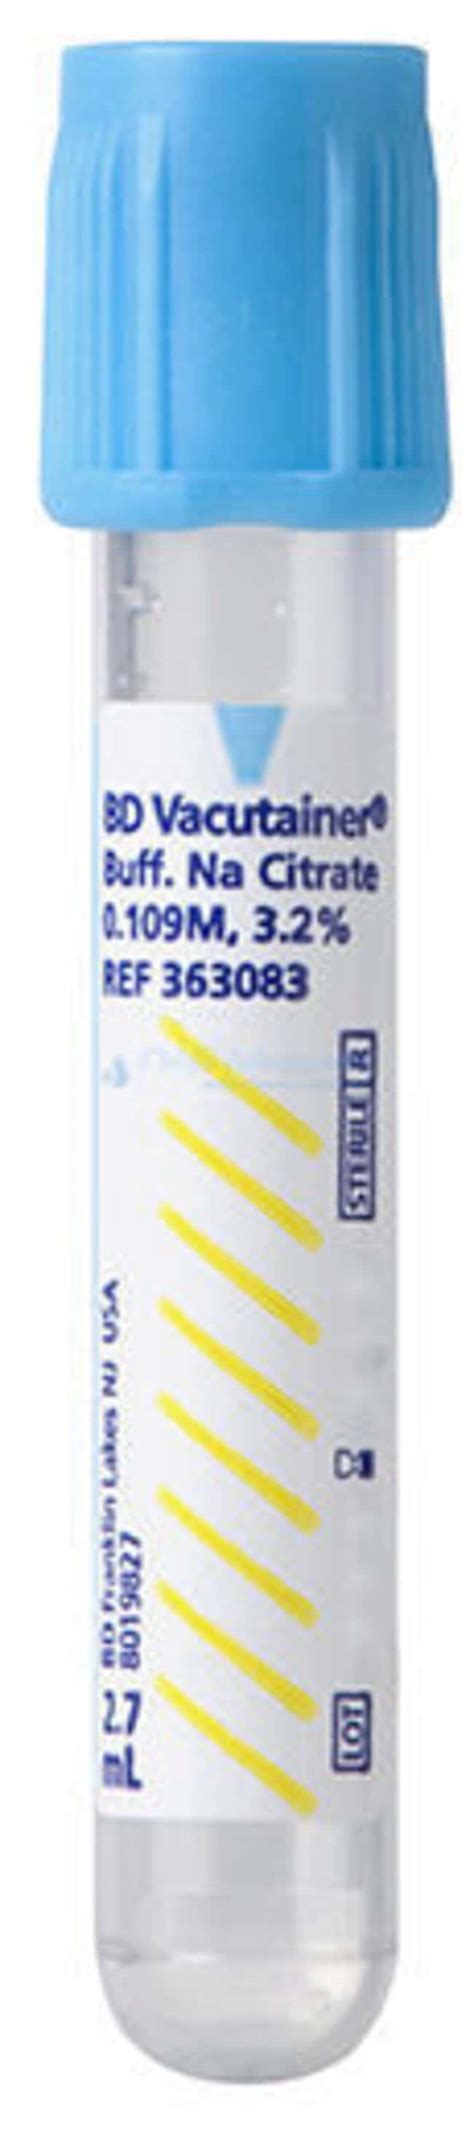 BD Vacutainer Citrate Tubes 6 ML Evacuated Blood Tubes Fisher Scientific